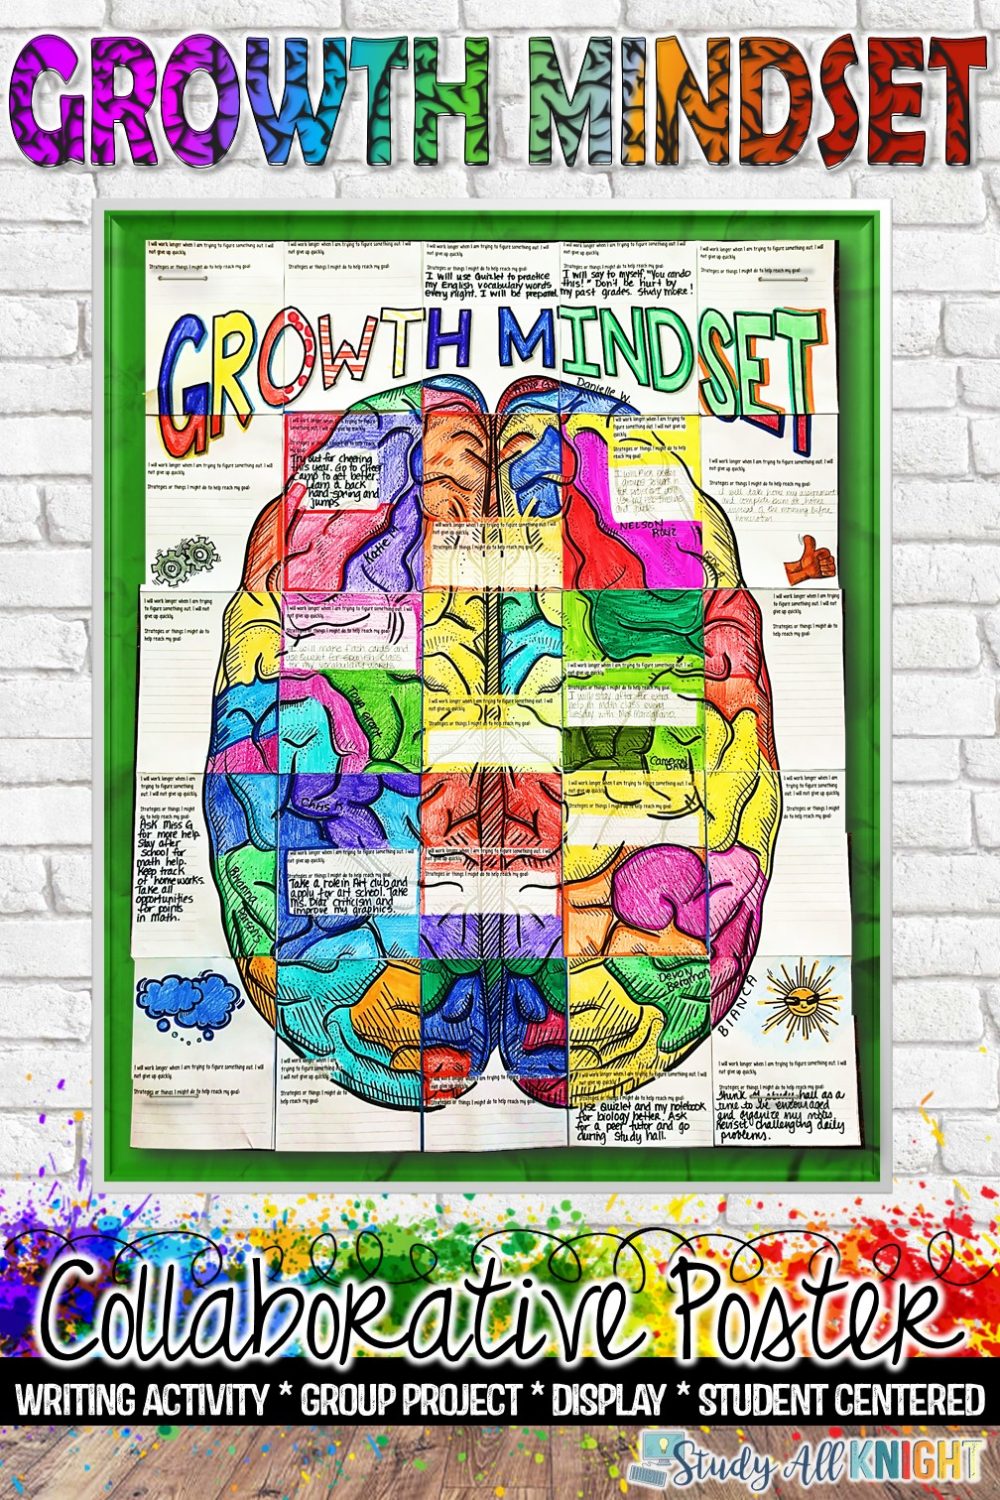 Growth Mindset Poster, Setting Goals, Collaborative Poster. You'll love watching your students collaborate. The activity is designed for students to communicate and work together. Encourage your students to find class members with poster pieces near their own to create their masterpiece. The writing activity is truly insightful and reflective of promoting a growth mindset, setting goals, learning strategies, and smart goals.  #growthmindset #iteach678